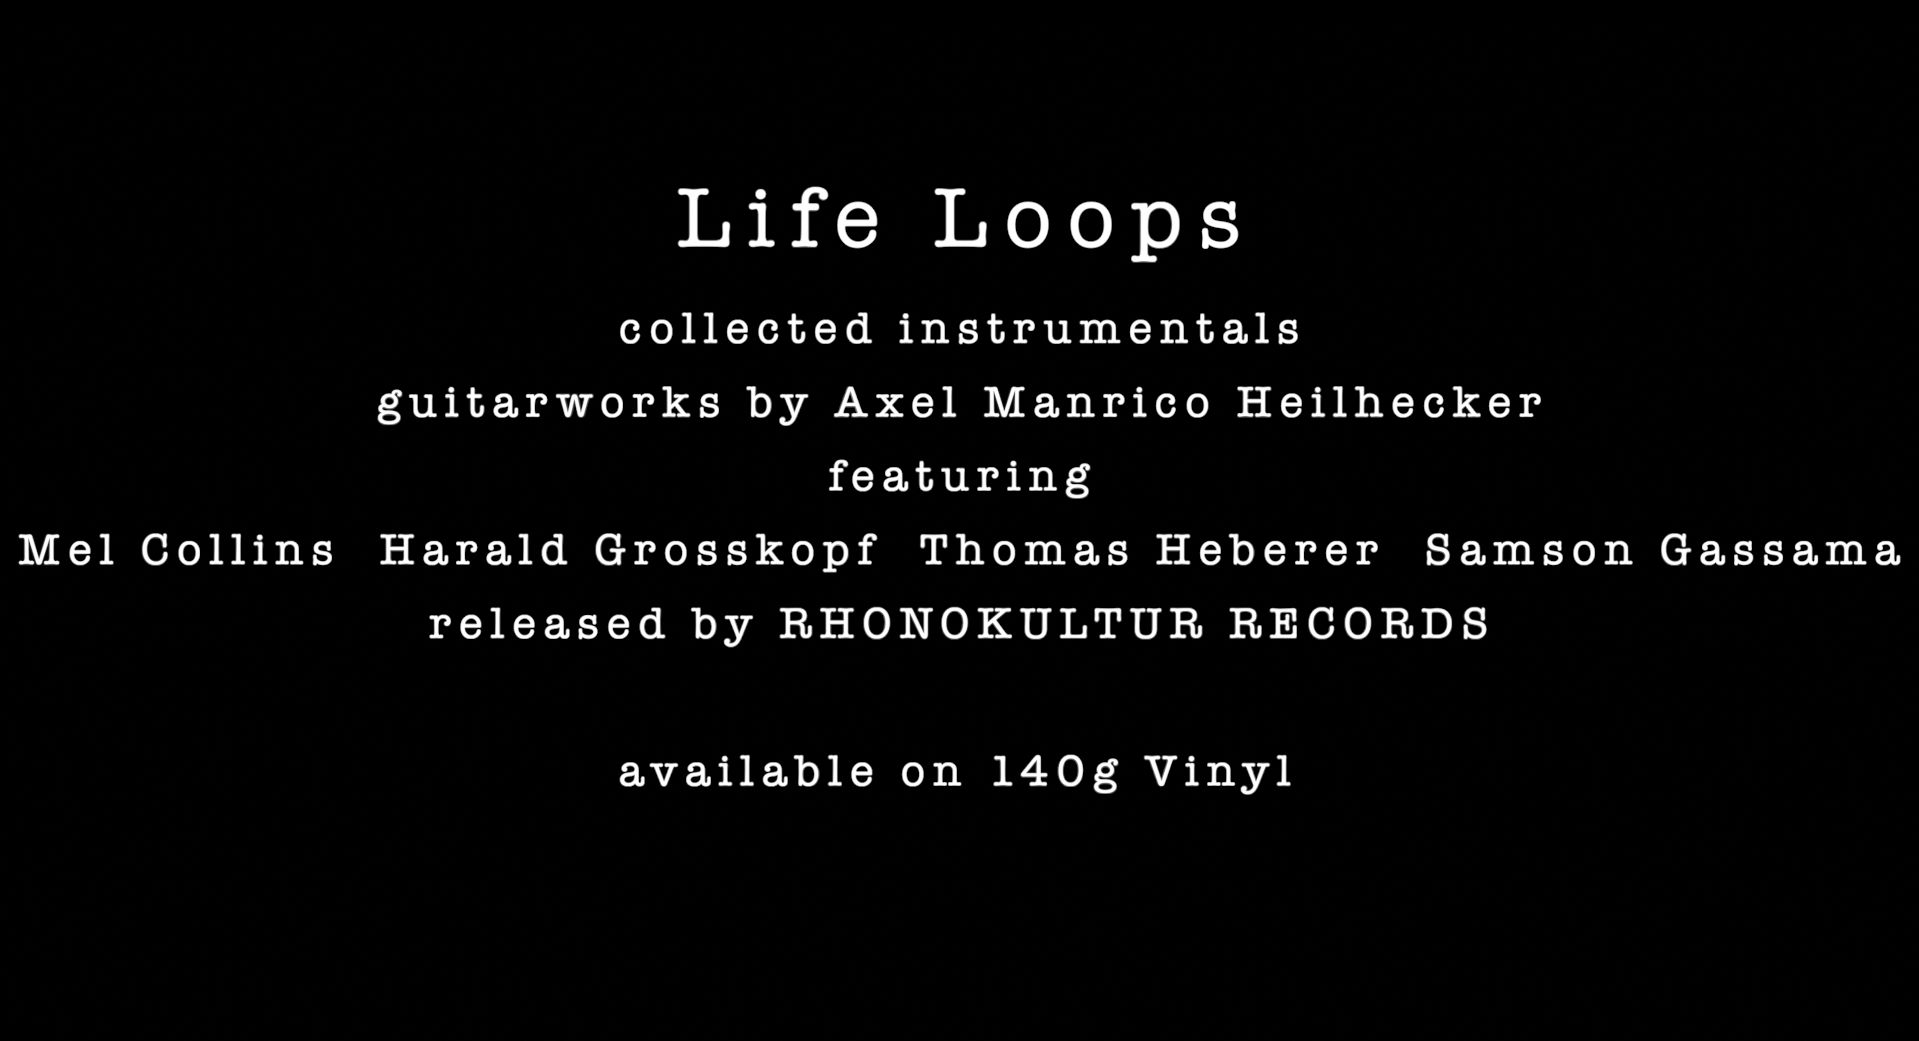 life loops - collected instrumentals, guitarworks by axel manrico heilhecker. Featuring mel Collins, Harald Grosskopf, Thomas Heberer, Samson gassama. Released by Phonokultur Records. Available on 140g Vinyl